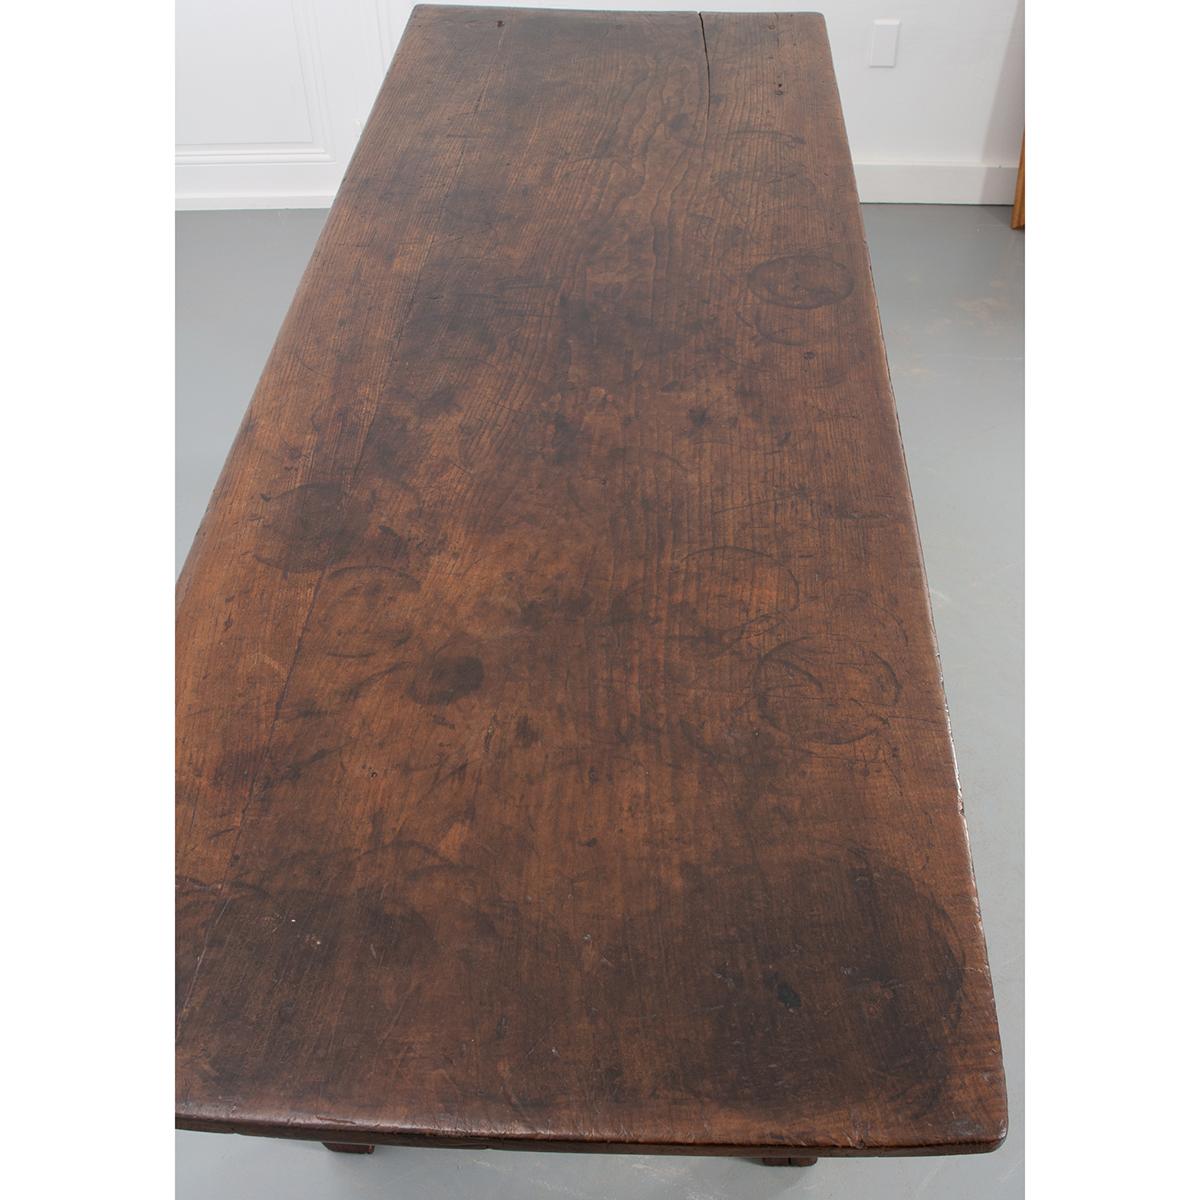 A handsome mixed wood table with stunning patina! The large, deep oak top has fantastic texture and sits above an apron finished with 3 large walnut front drawers, each with a turned wood knob. Unique, hand carved designs across the oak apron and at